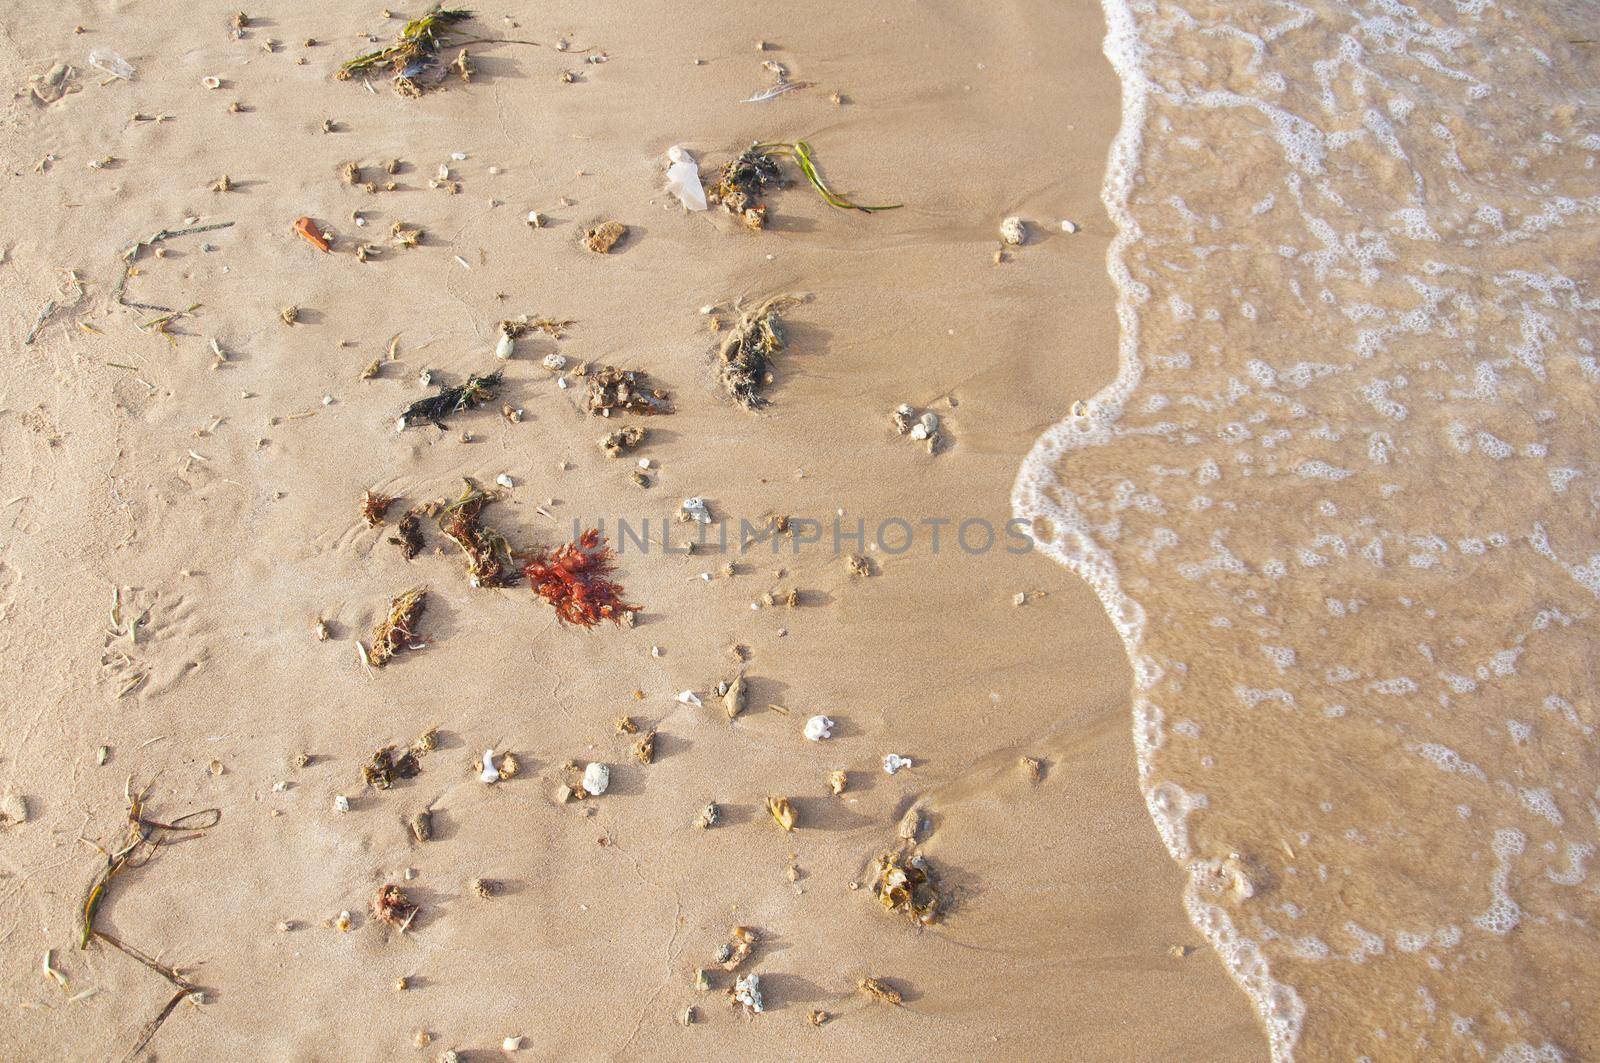 Sea shore with shells, rocks and water plants, summer, Spain